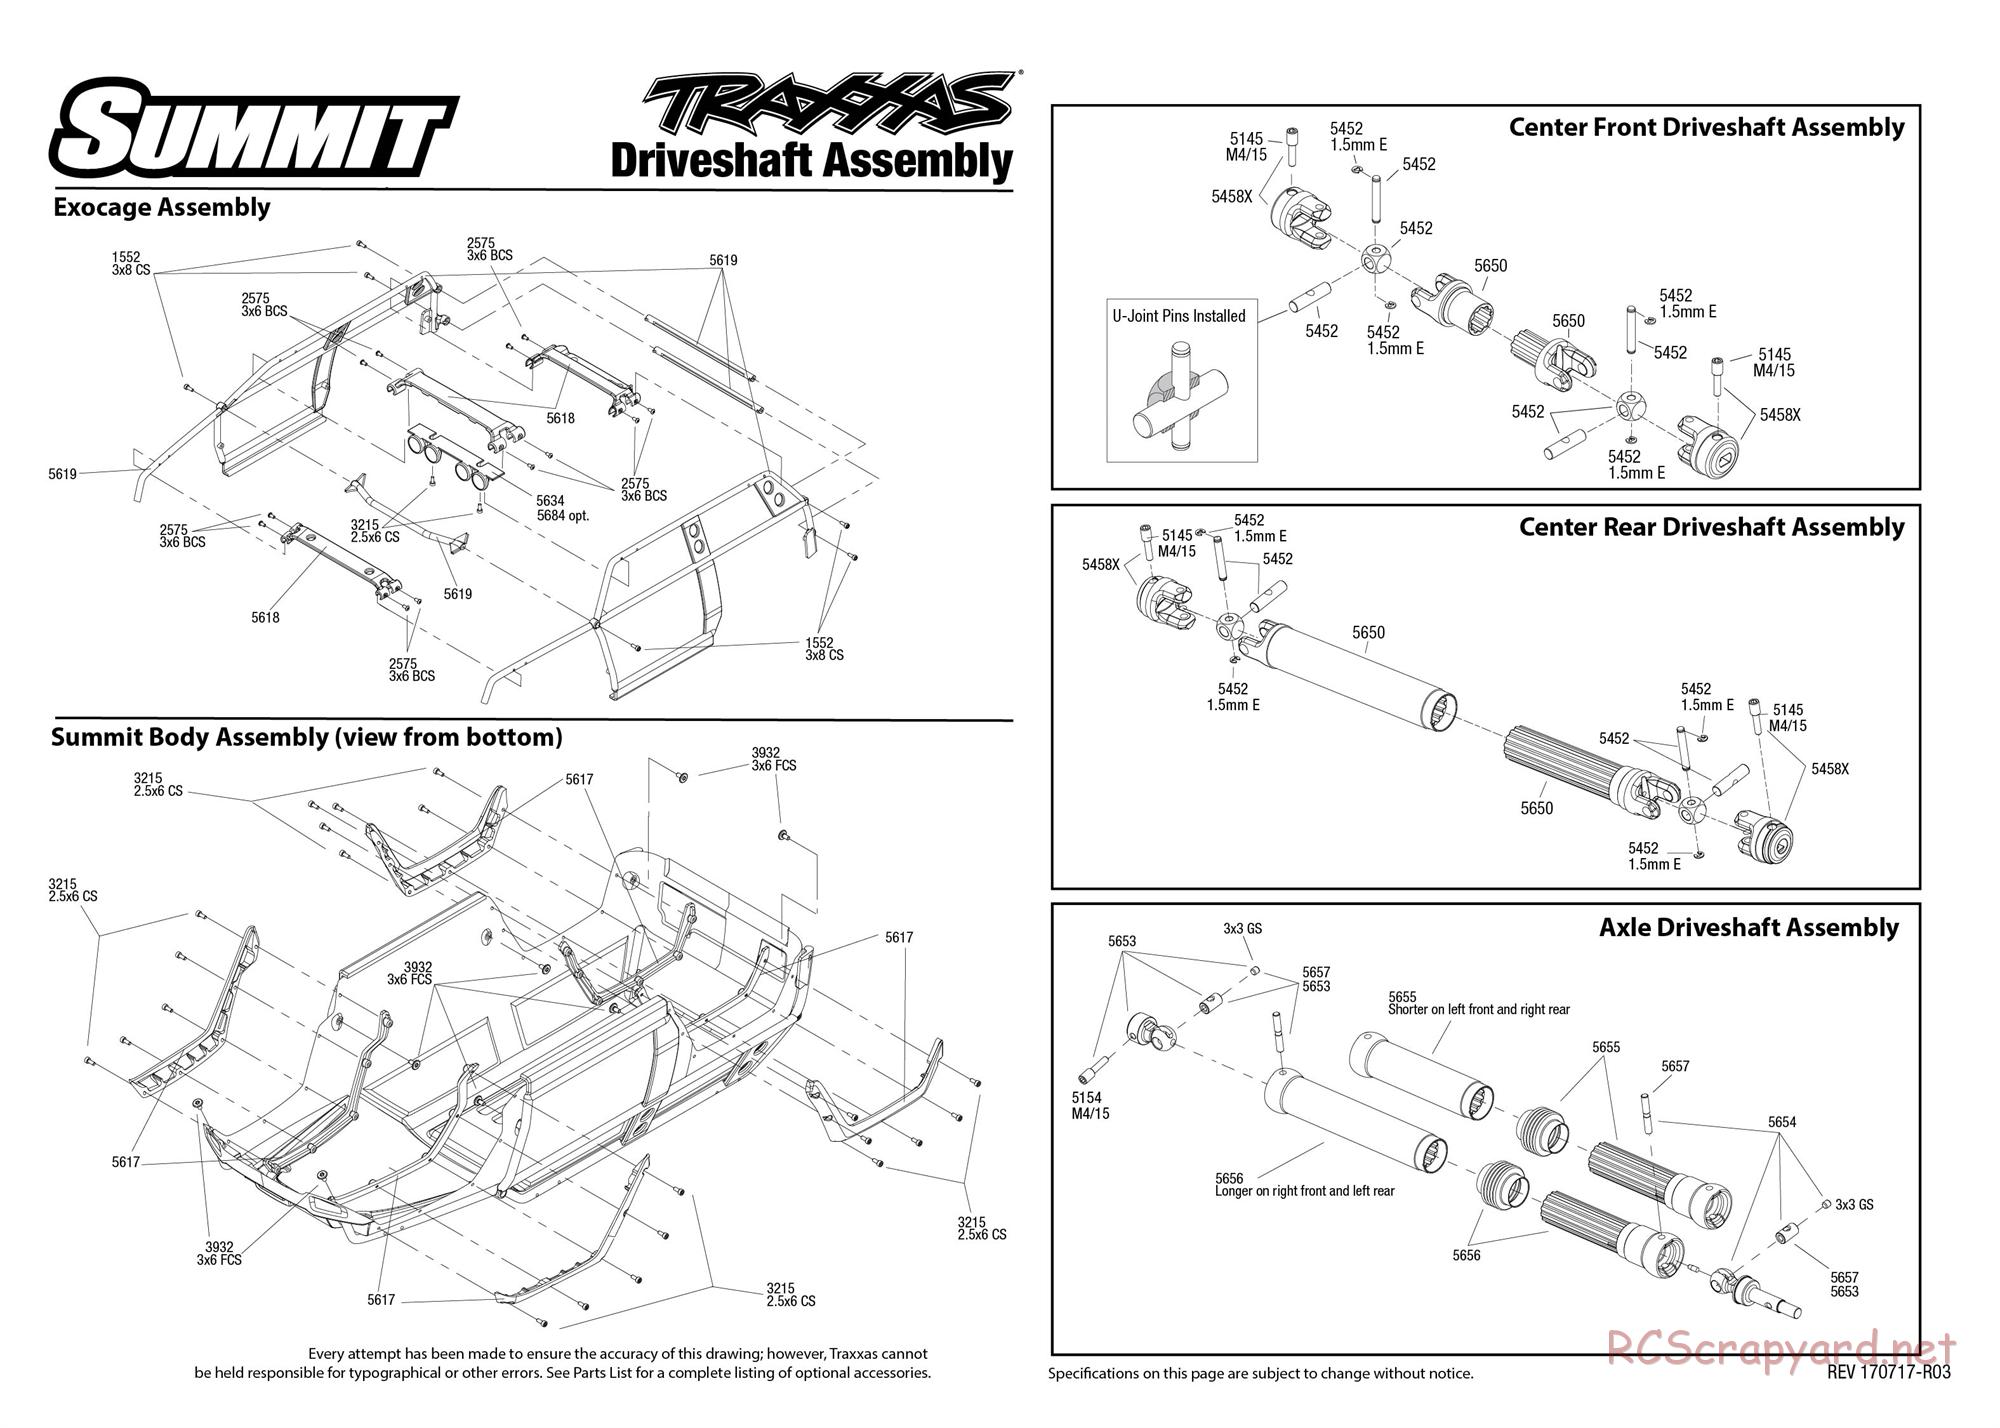 Traxxas - Summit (2015) - Exploded Views - Page 2